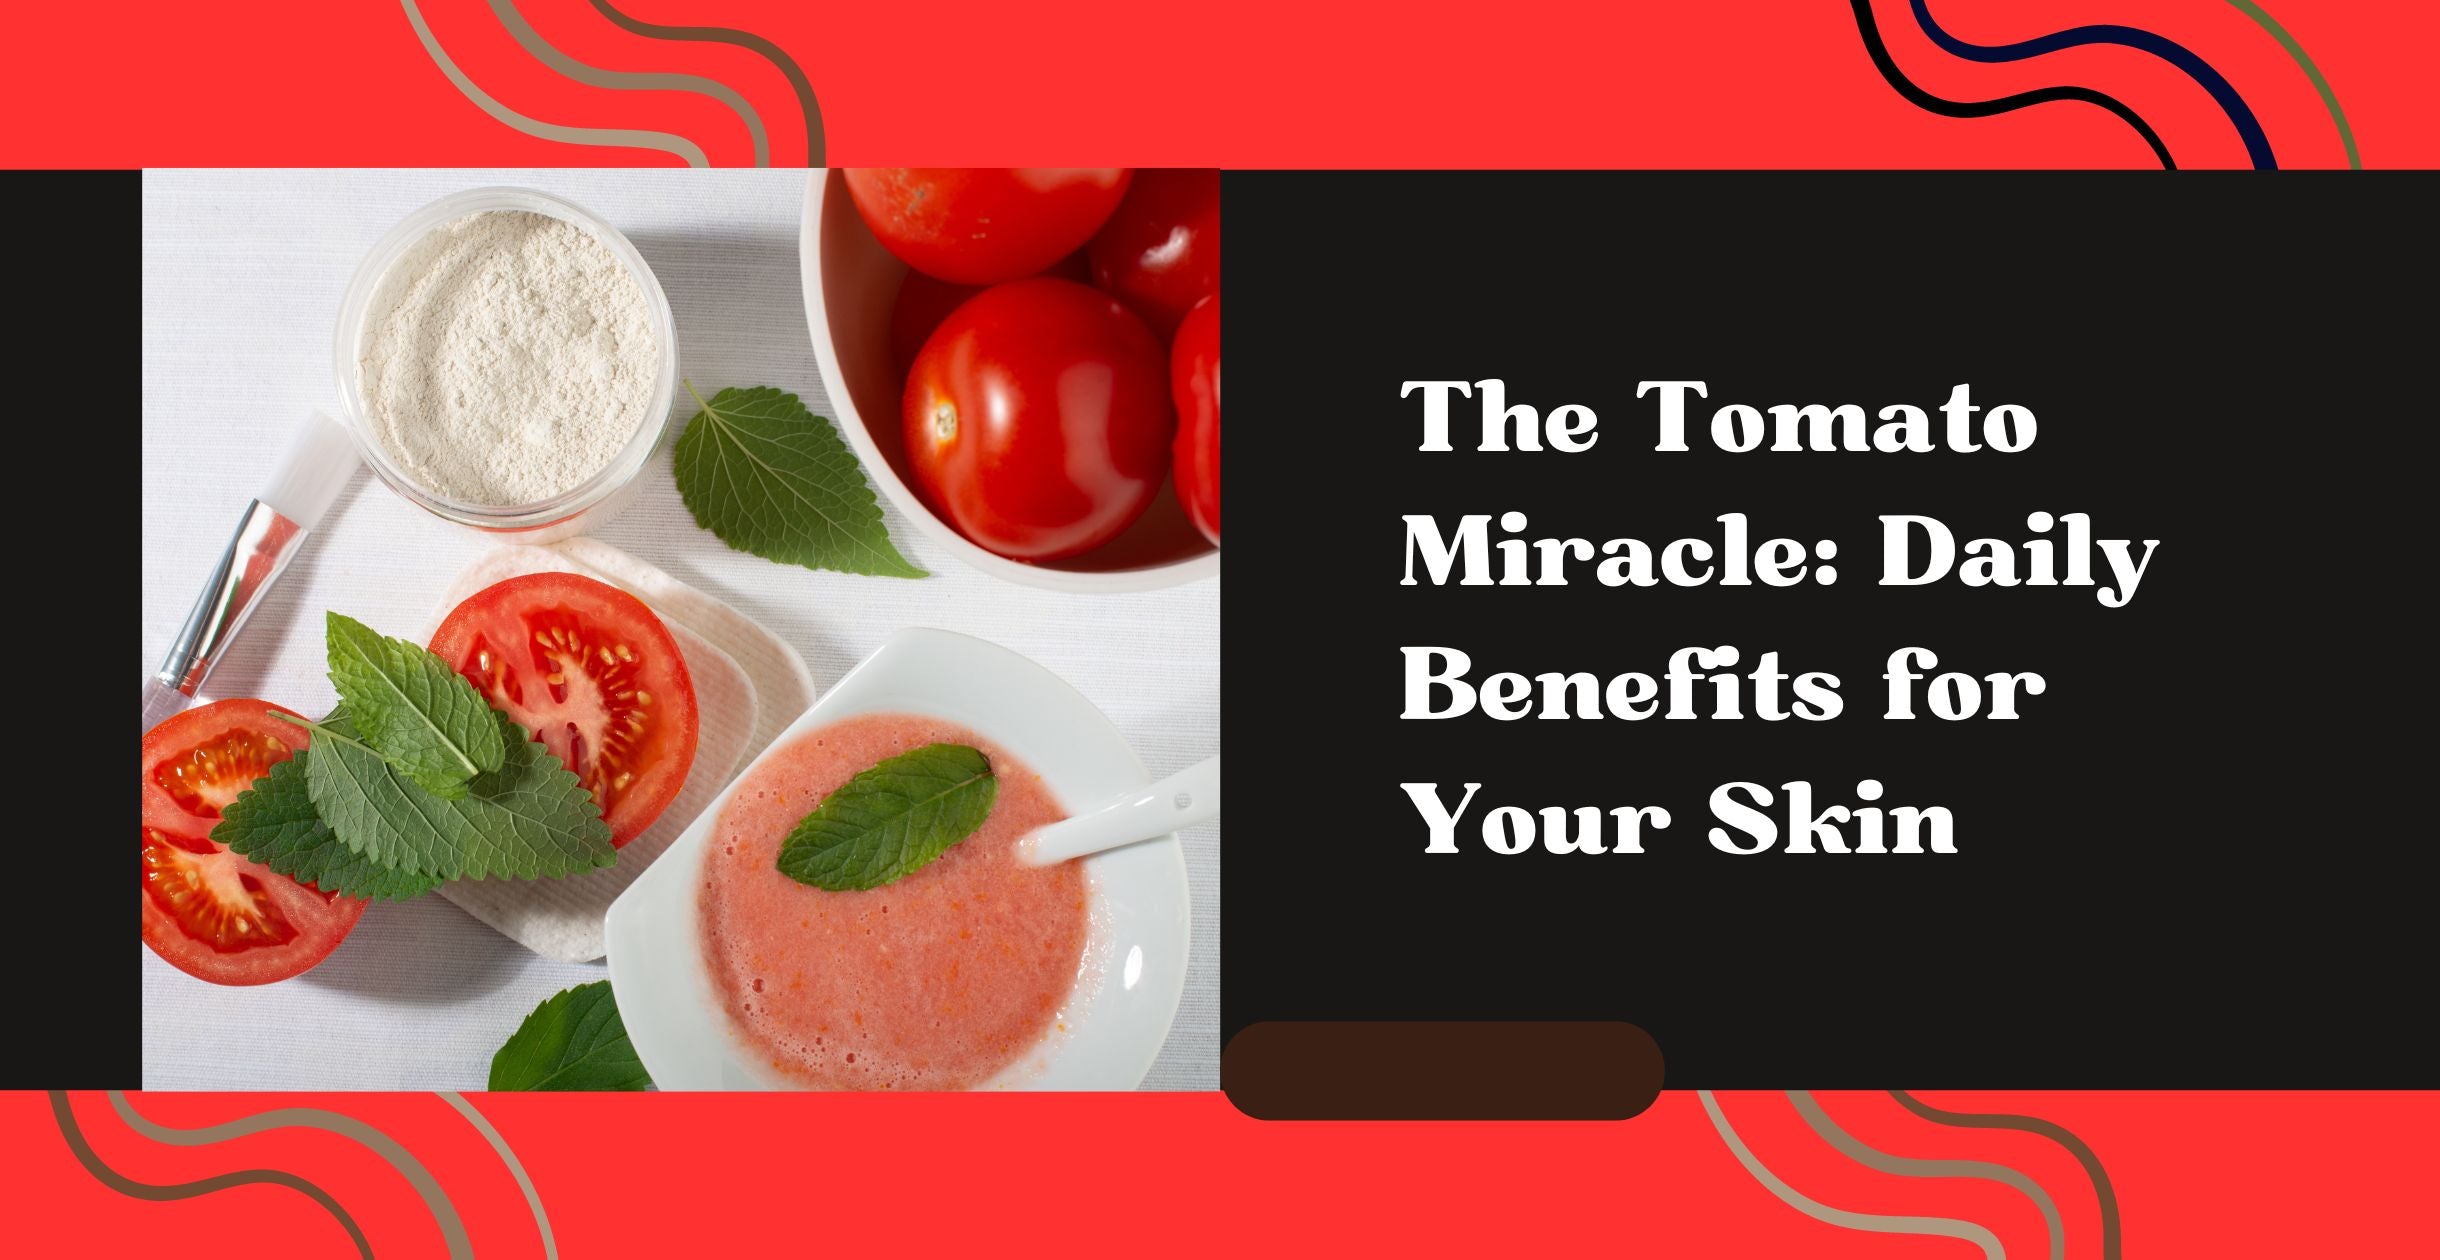 The Tomato Miracle: Daily Benefits for Your Skin